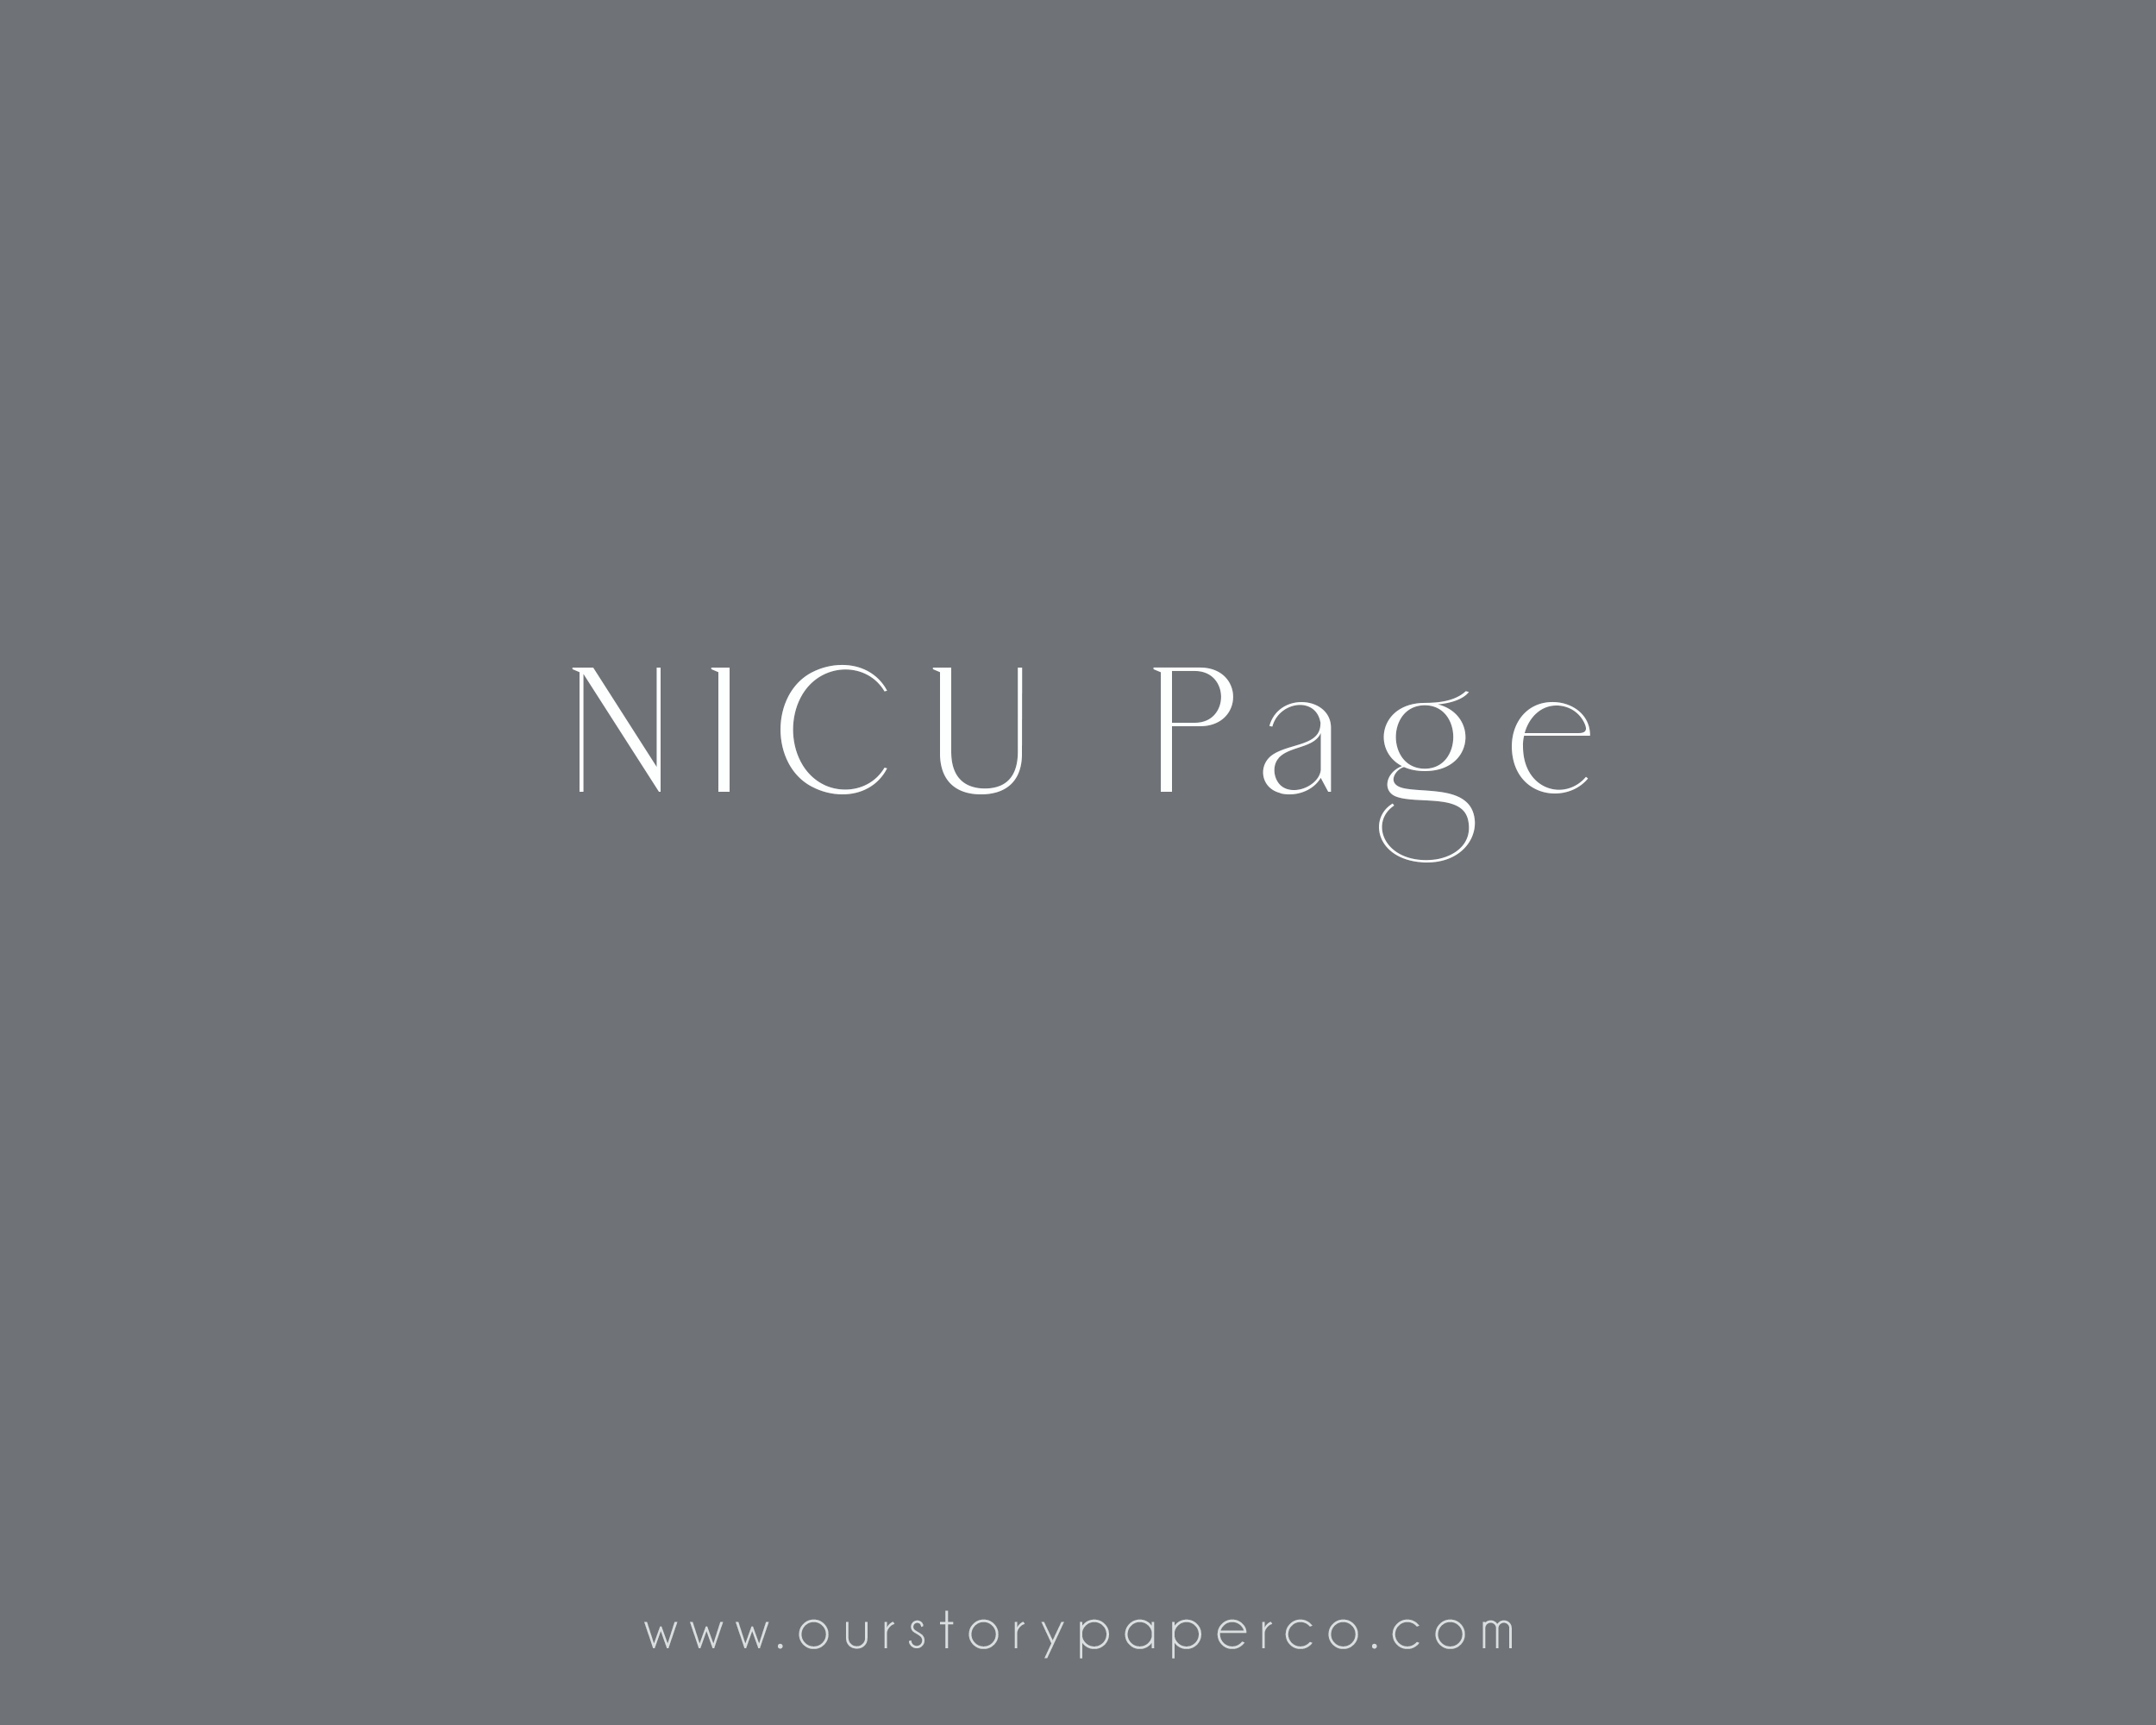 NICU Page - Our Story Paper Co.